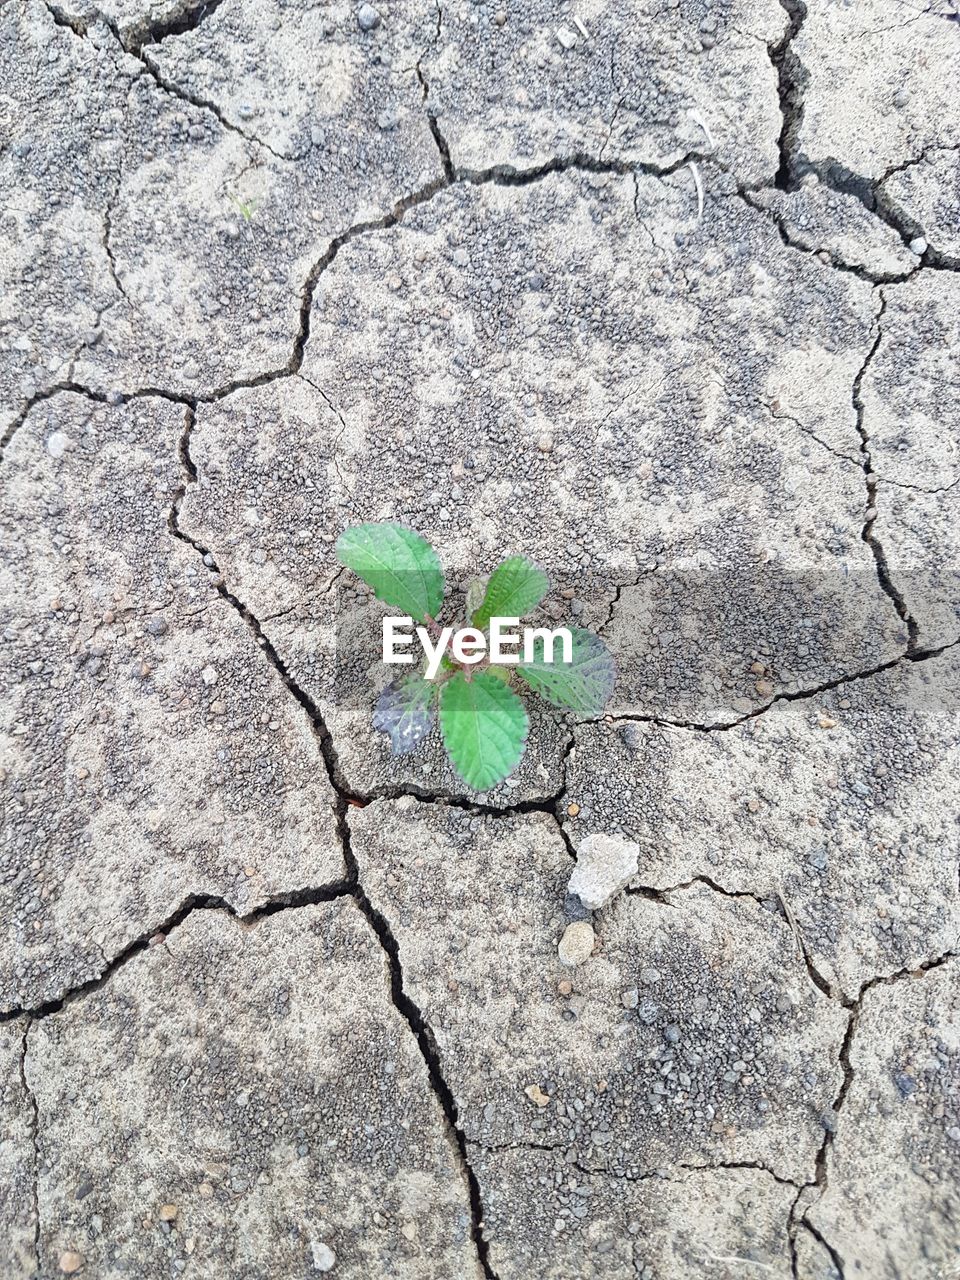 HIGH ANGLE VIEW OF DRY LEAVES ON CONCRETE